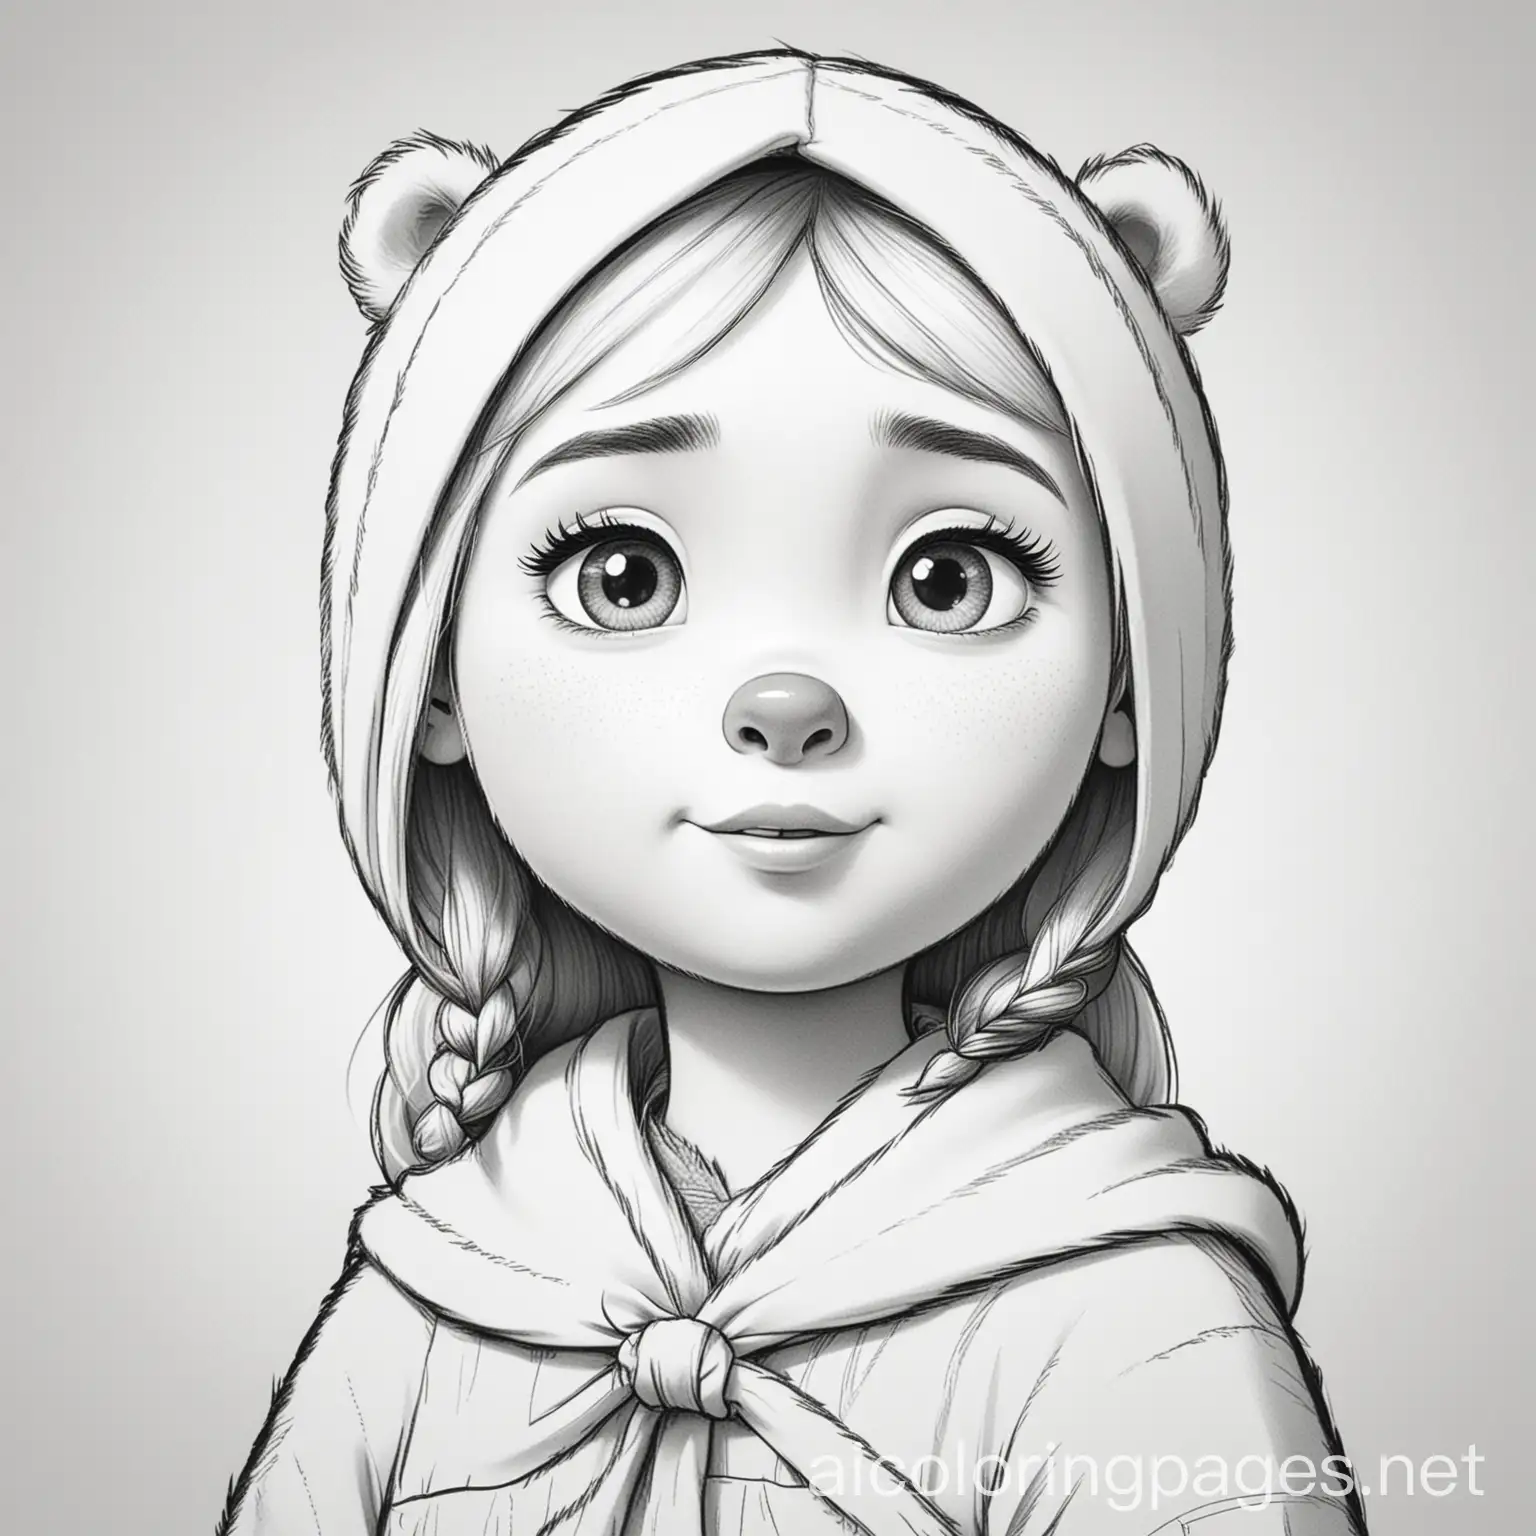 masha and bear, Coloring Page, black and white, line art, white background, Simplicity, Ample White Space. The background of the coloring page is plain white to make it easy for young children to color within the lines. The outlines of all the subjects are easy to distinguish, making it simple for kids to color without too much difficulty